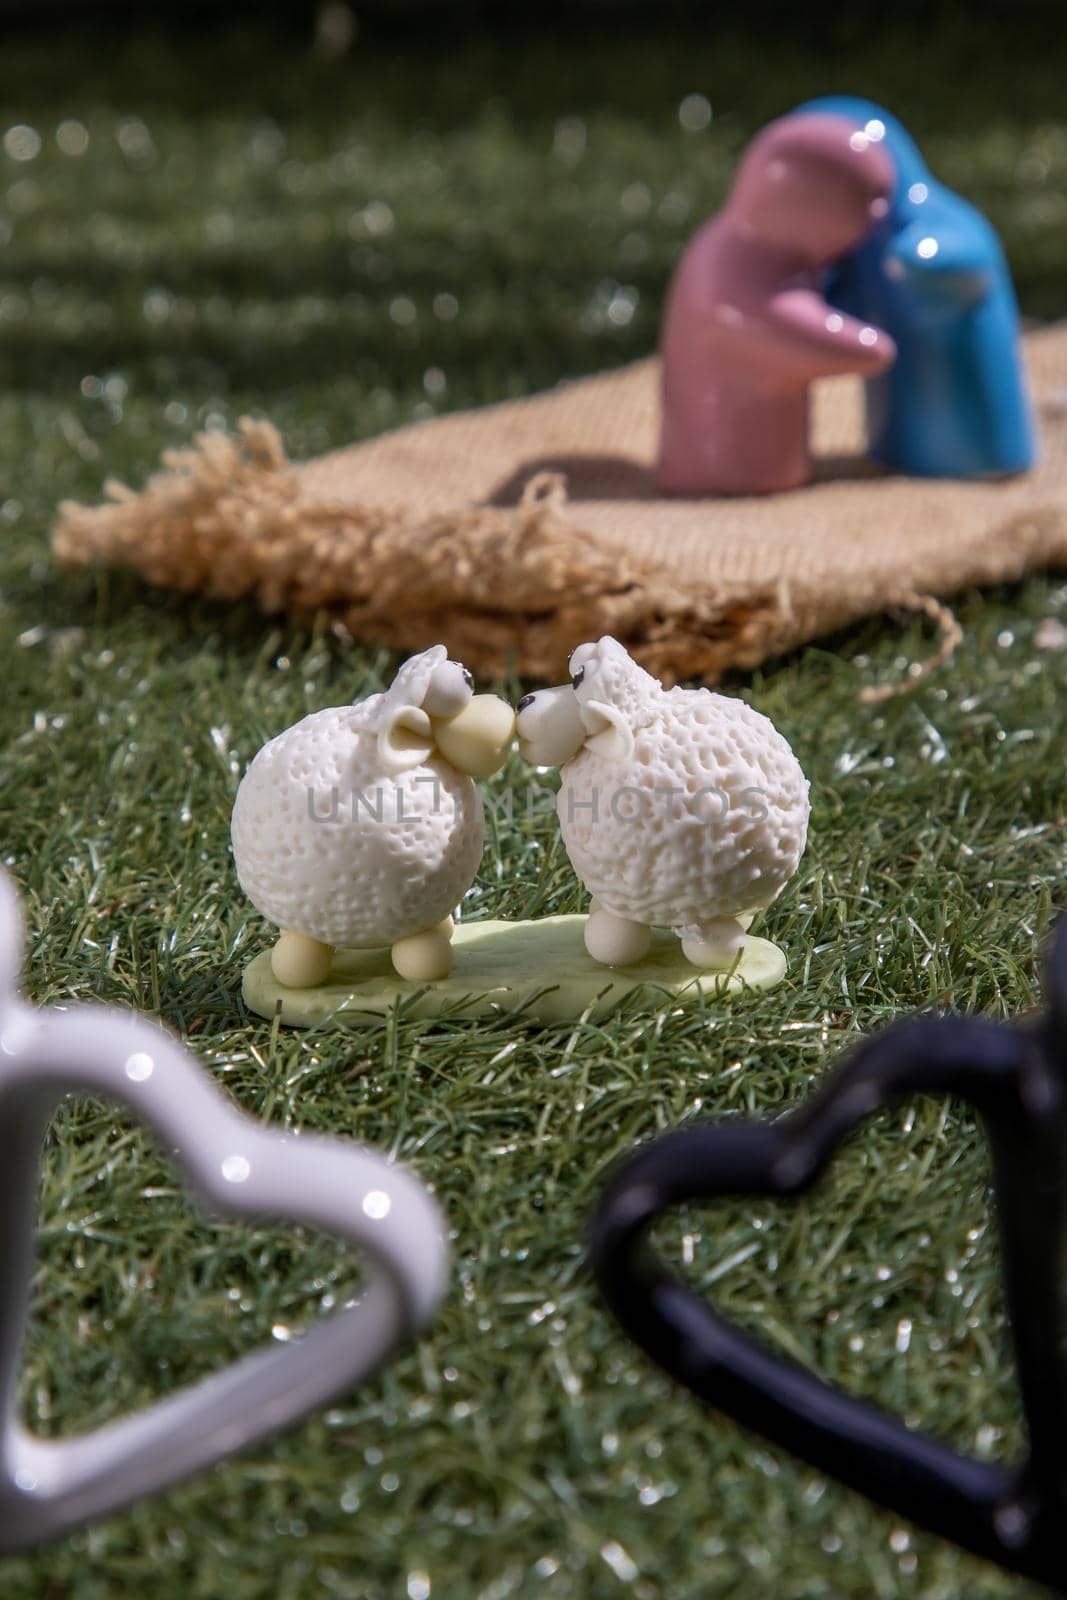 Ceramic couple dolls hug and Sheep ceramic couple dolls Kissing on lawn. Concept for anniversary, Wedding and eternal love concept, Romance wedding or Valentine’s day.